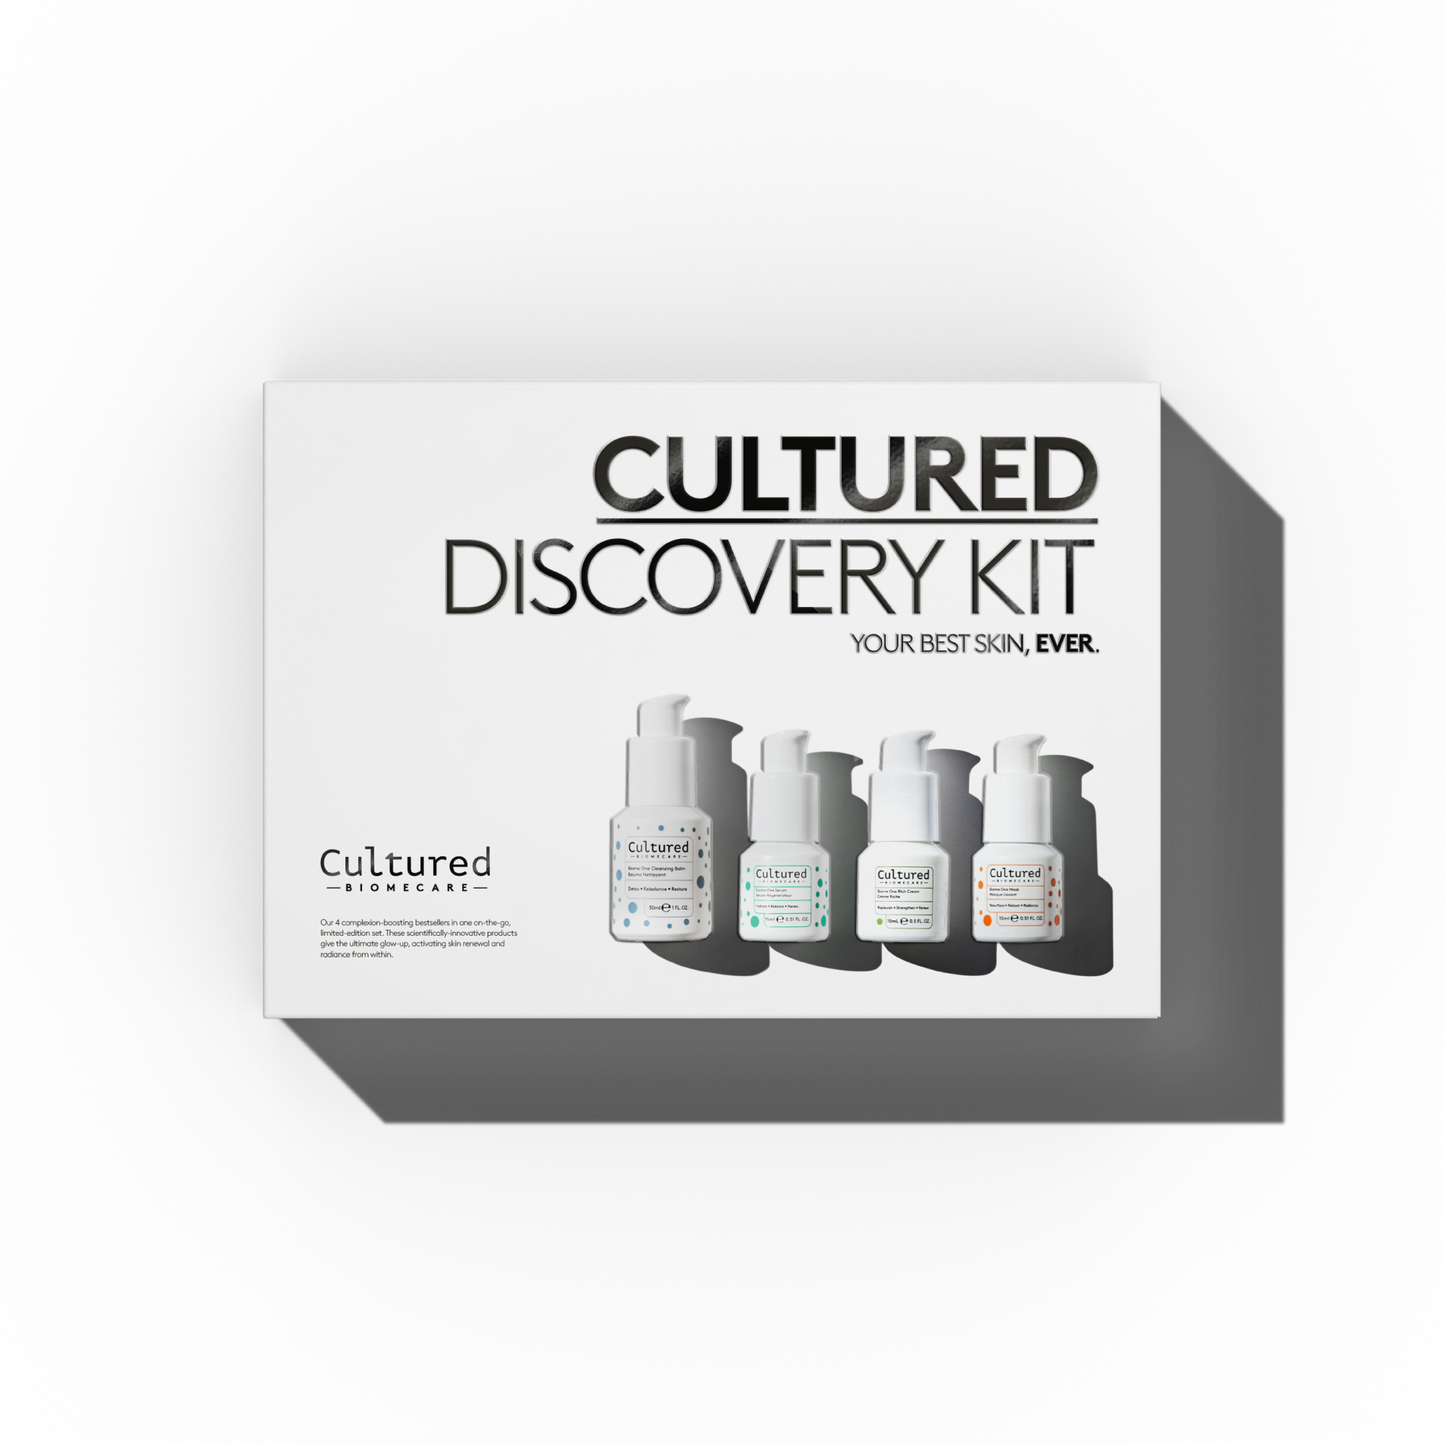 Close up Cultured Discovered Kit featuring four products for best skin.